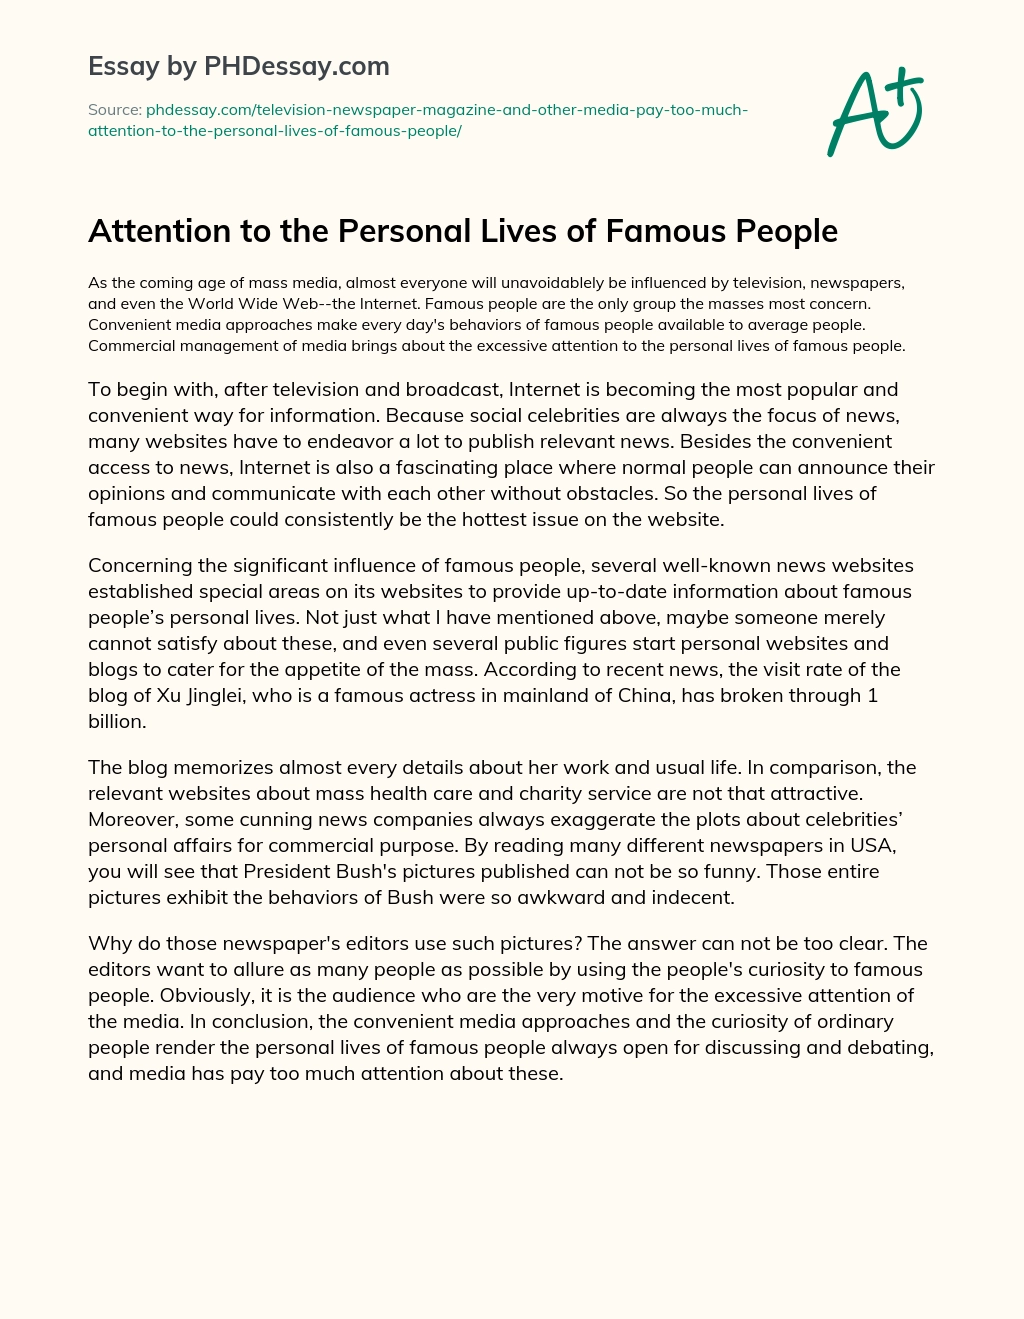 Attention to the Personal Lives of Famous People essay